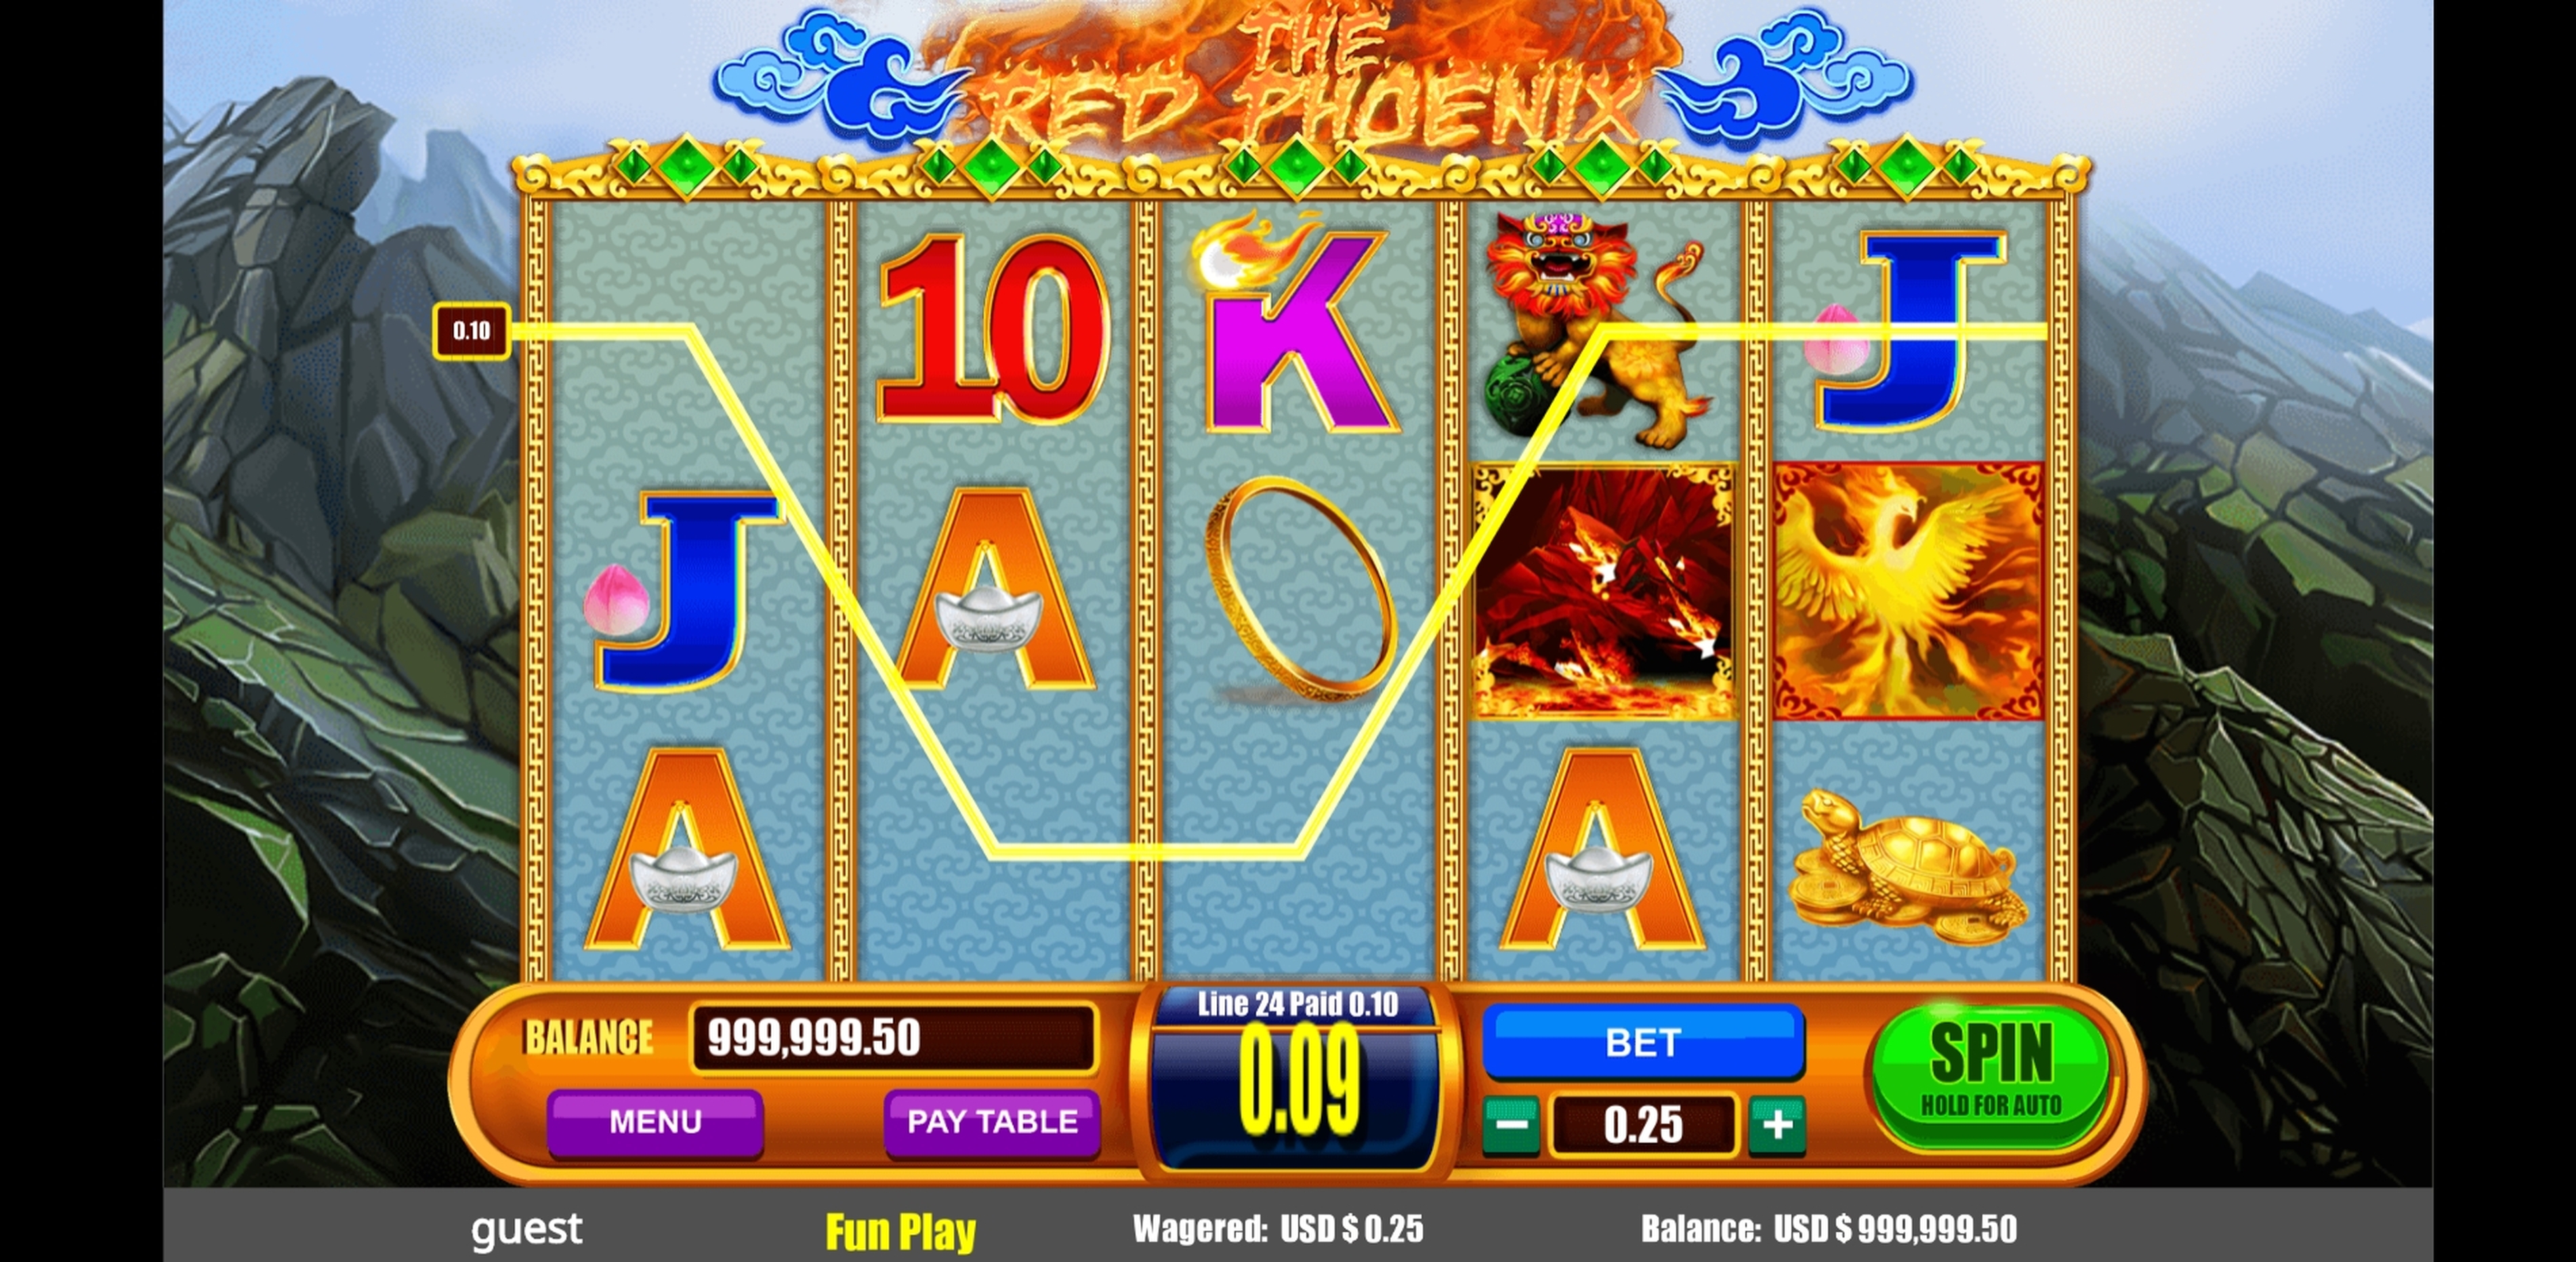 Win Money in The Red Phoenix Free Slot Game by August Gaming